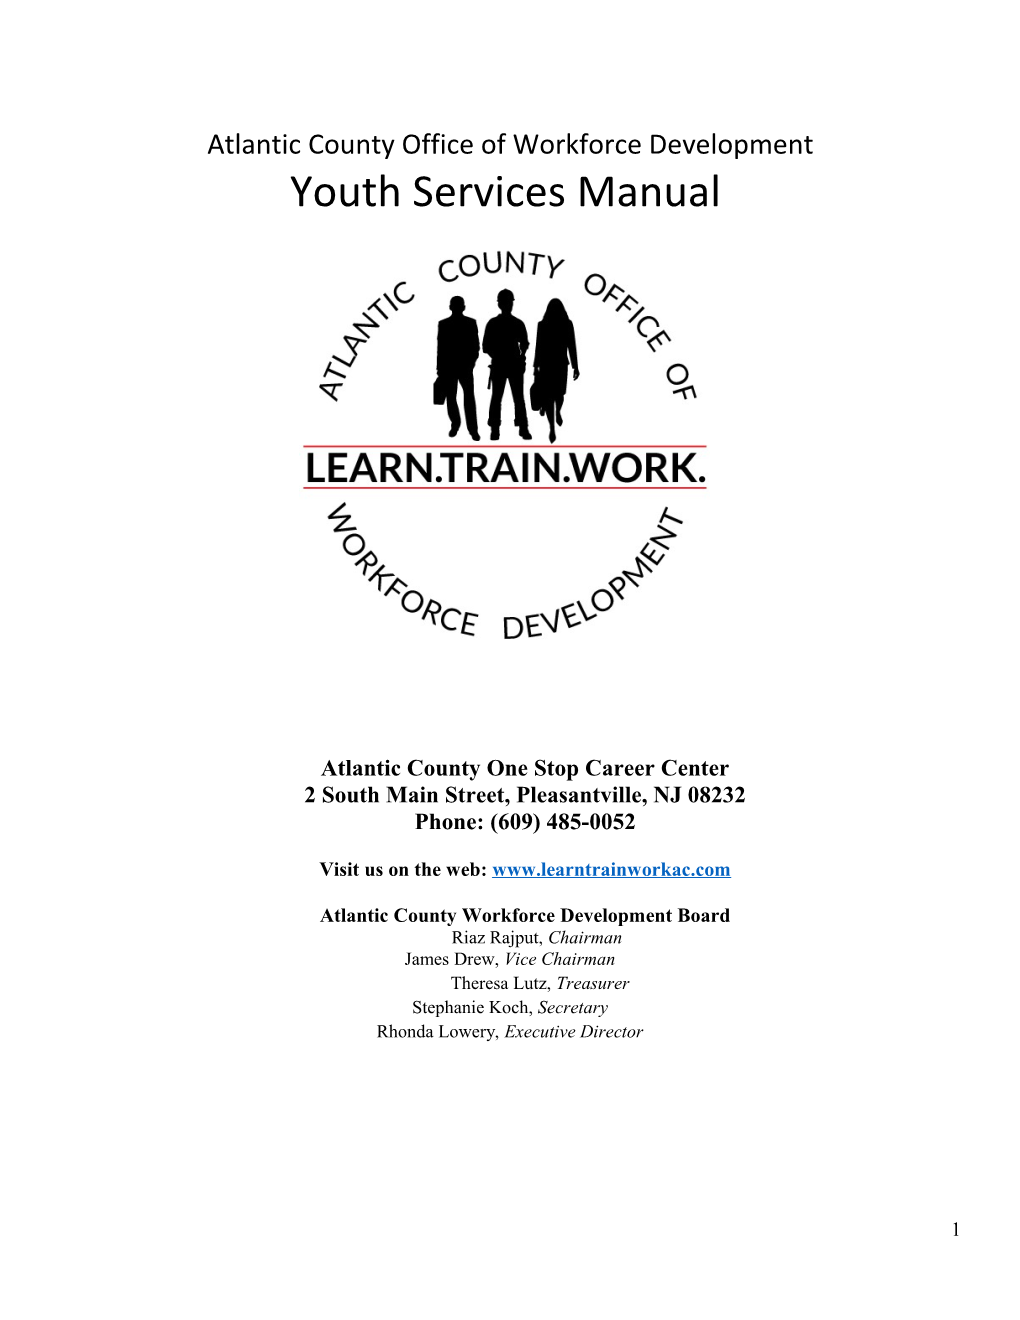 PY 2012 Youth Services Vendor Guide